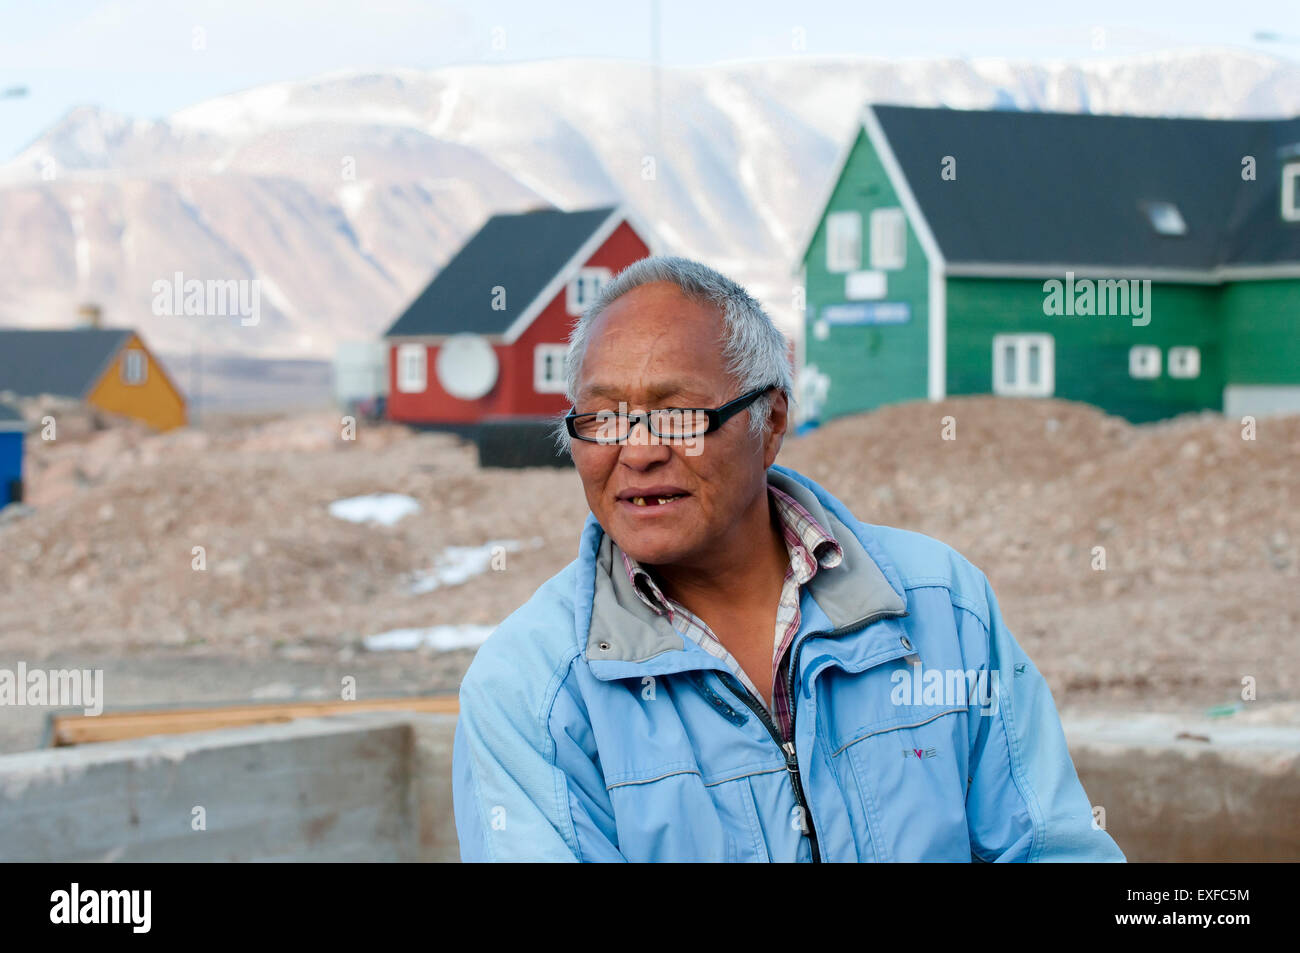 Local Man from Ittoqqortoormiit Village - Greenland Stock Photo